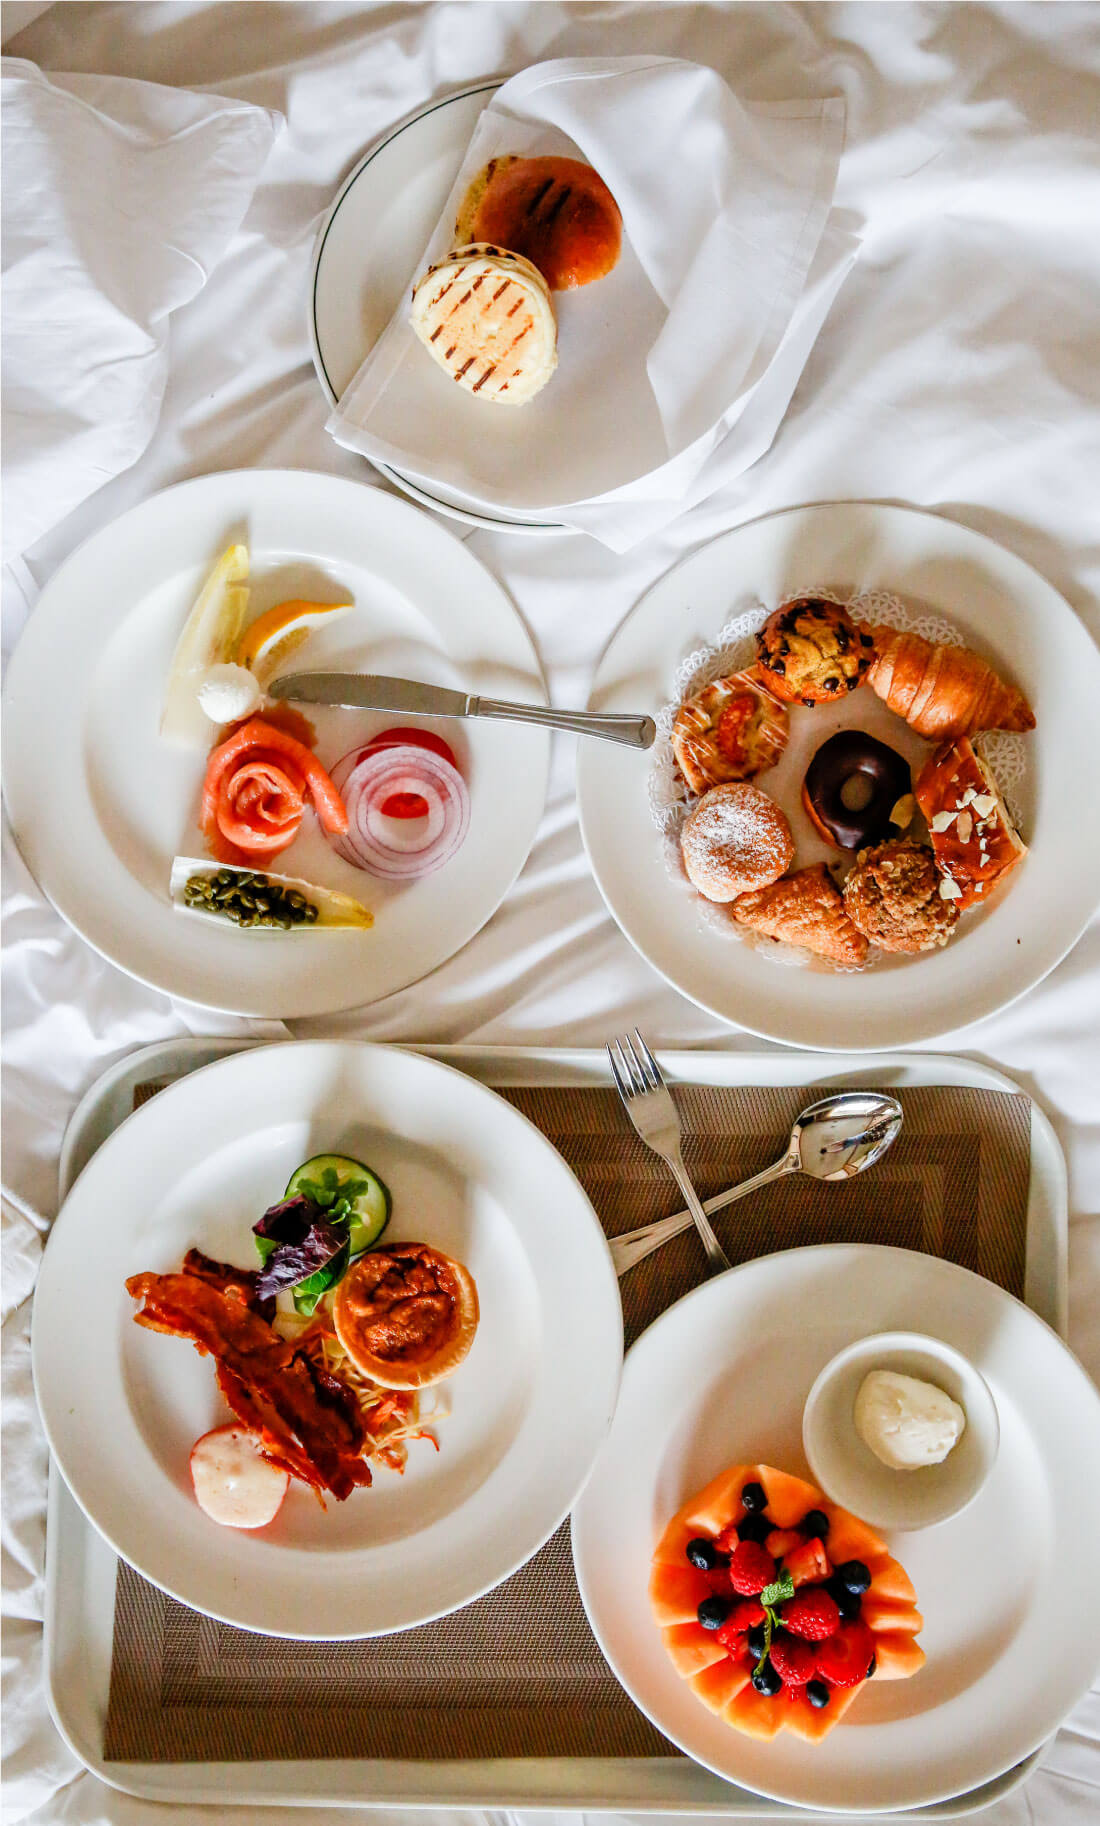 Tips, tricks and things to keep in mind about food on a Princess Cruise - room service. www.thirtyhandmadedays.com